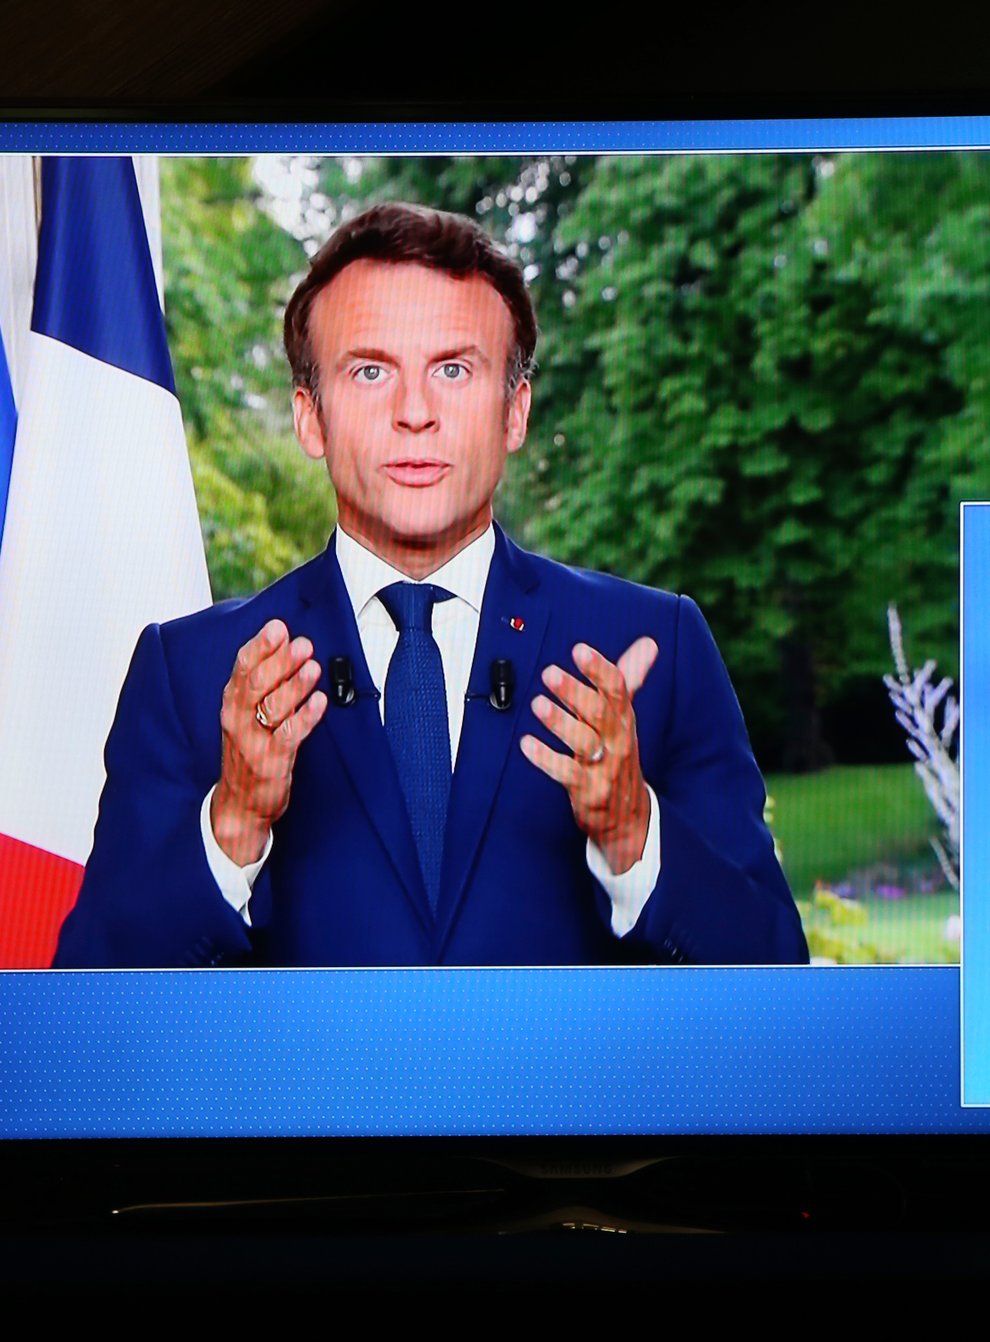 French President Emmanuel Macron appears on a screen as he gives a national televised address (Bob Edme/AP)